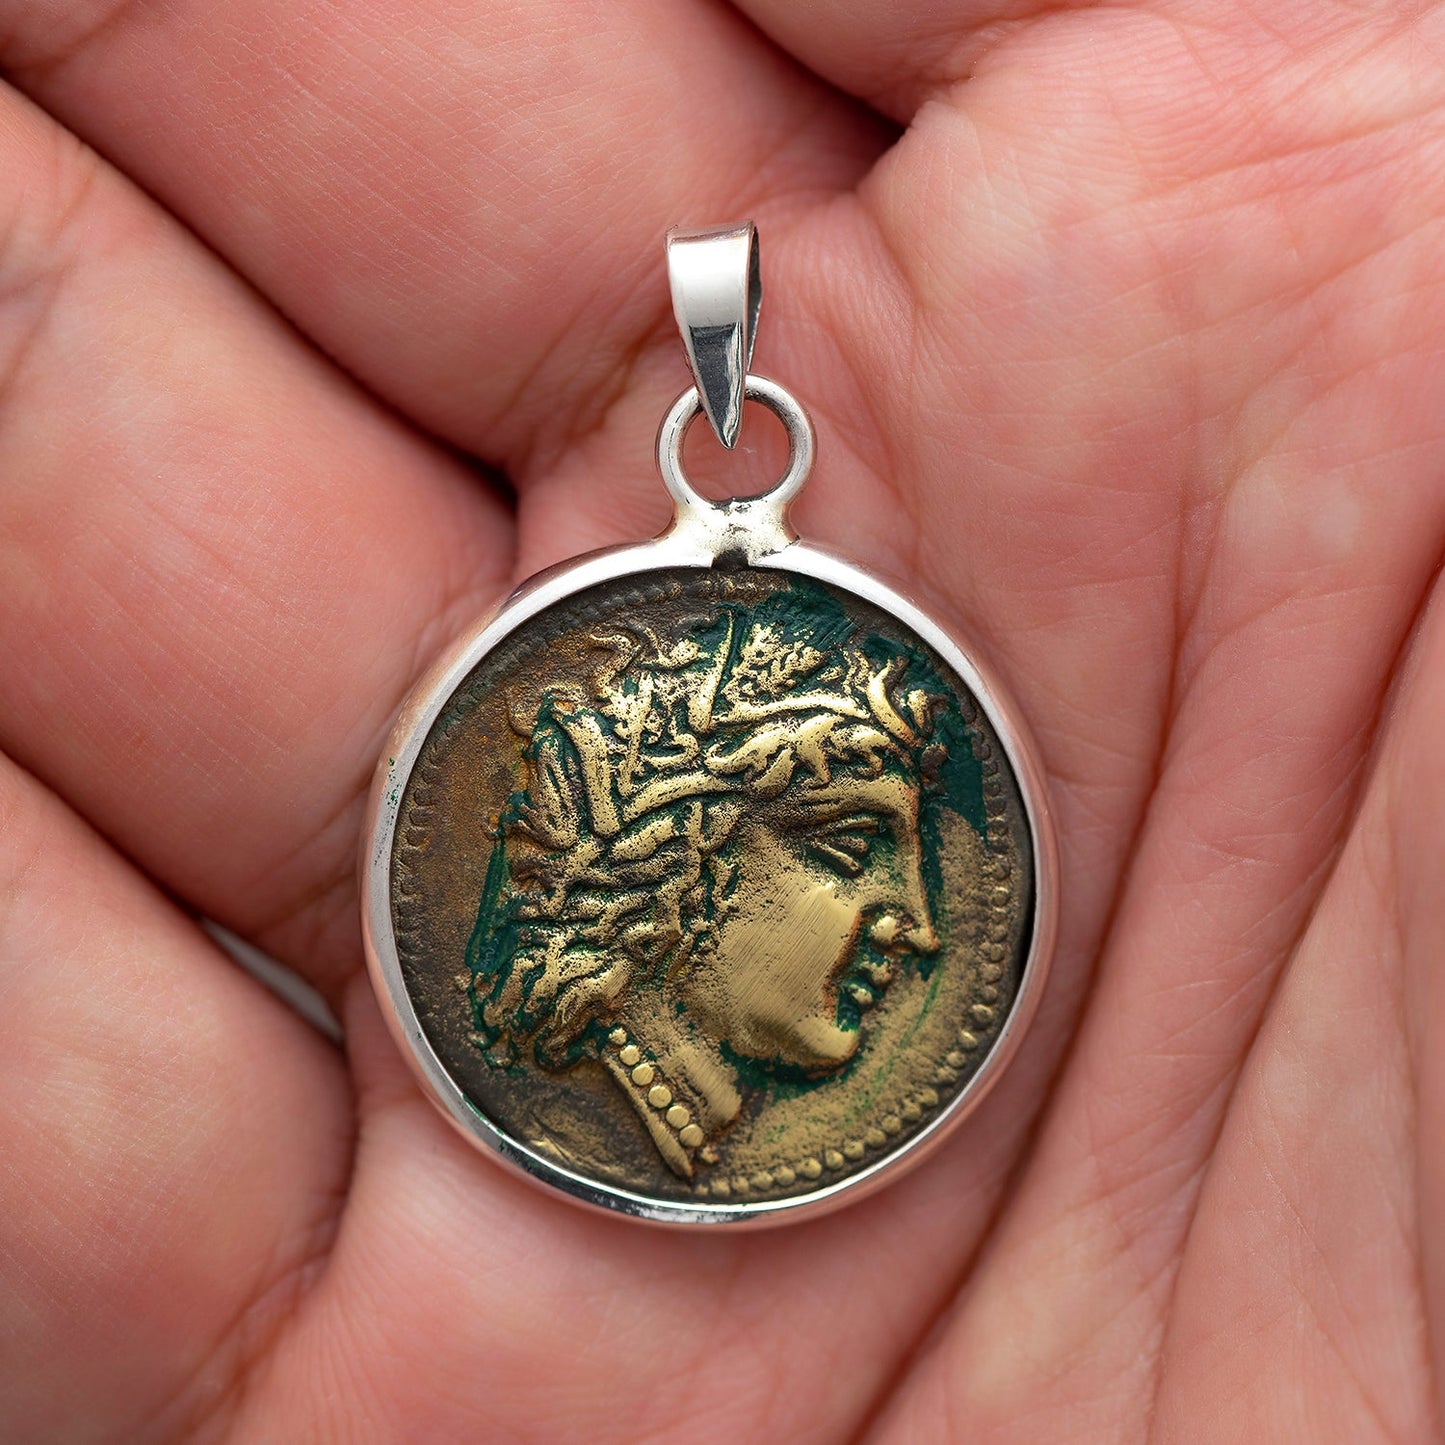 Sterling Silver and Brass Lucania-Metapontum Ancient Greek Coin - SilverMania925